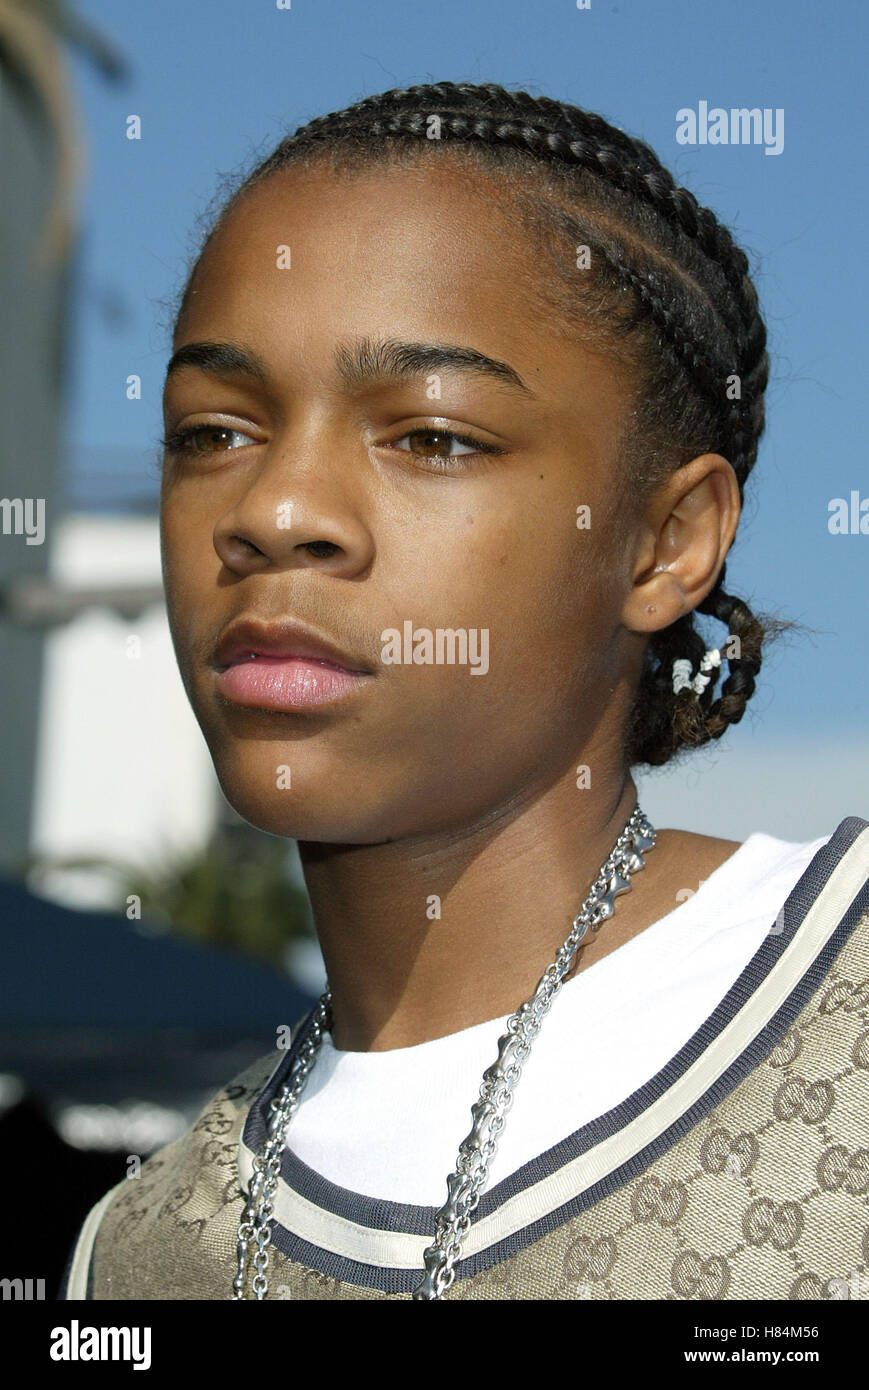 Lil Bow Wow High Resolution Stock Photography and Images Alamy